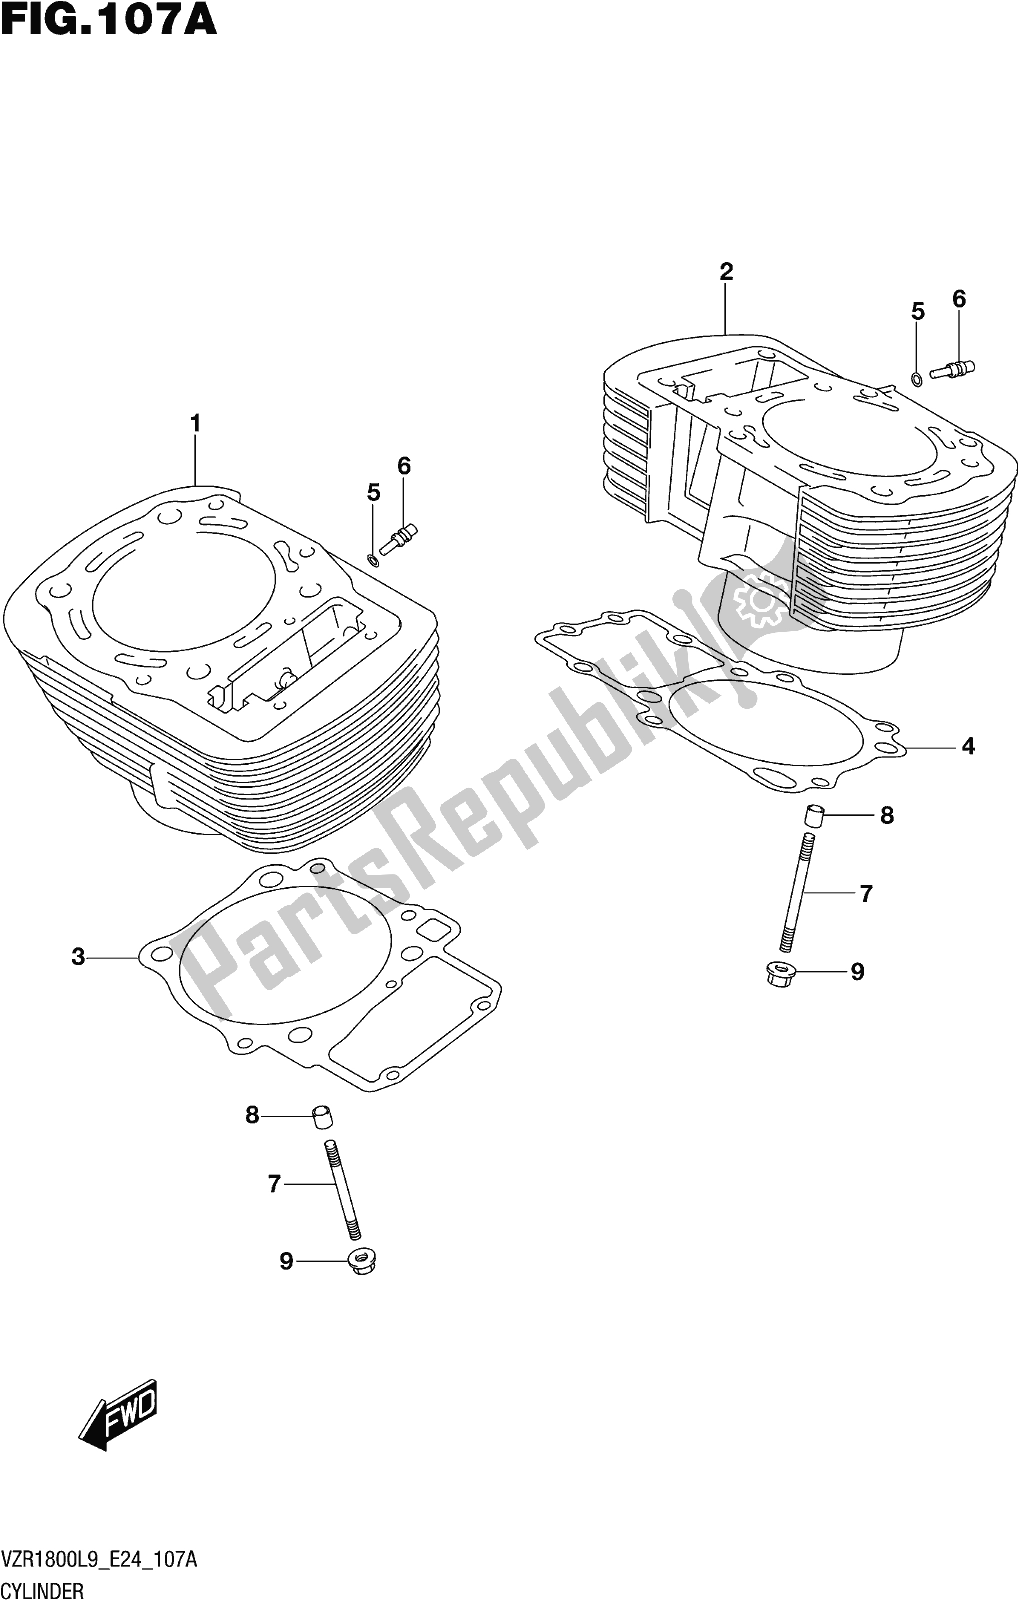 All parts for the Fig. 107a Cylinder of the Suzuki VZR 1800 BZ 2019